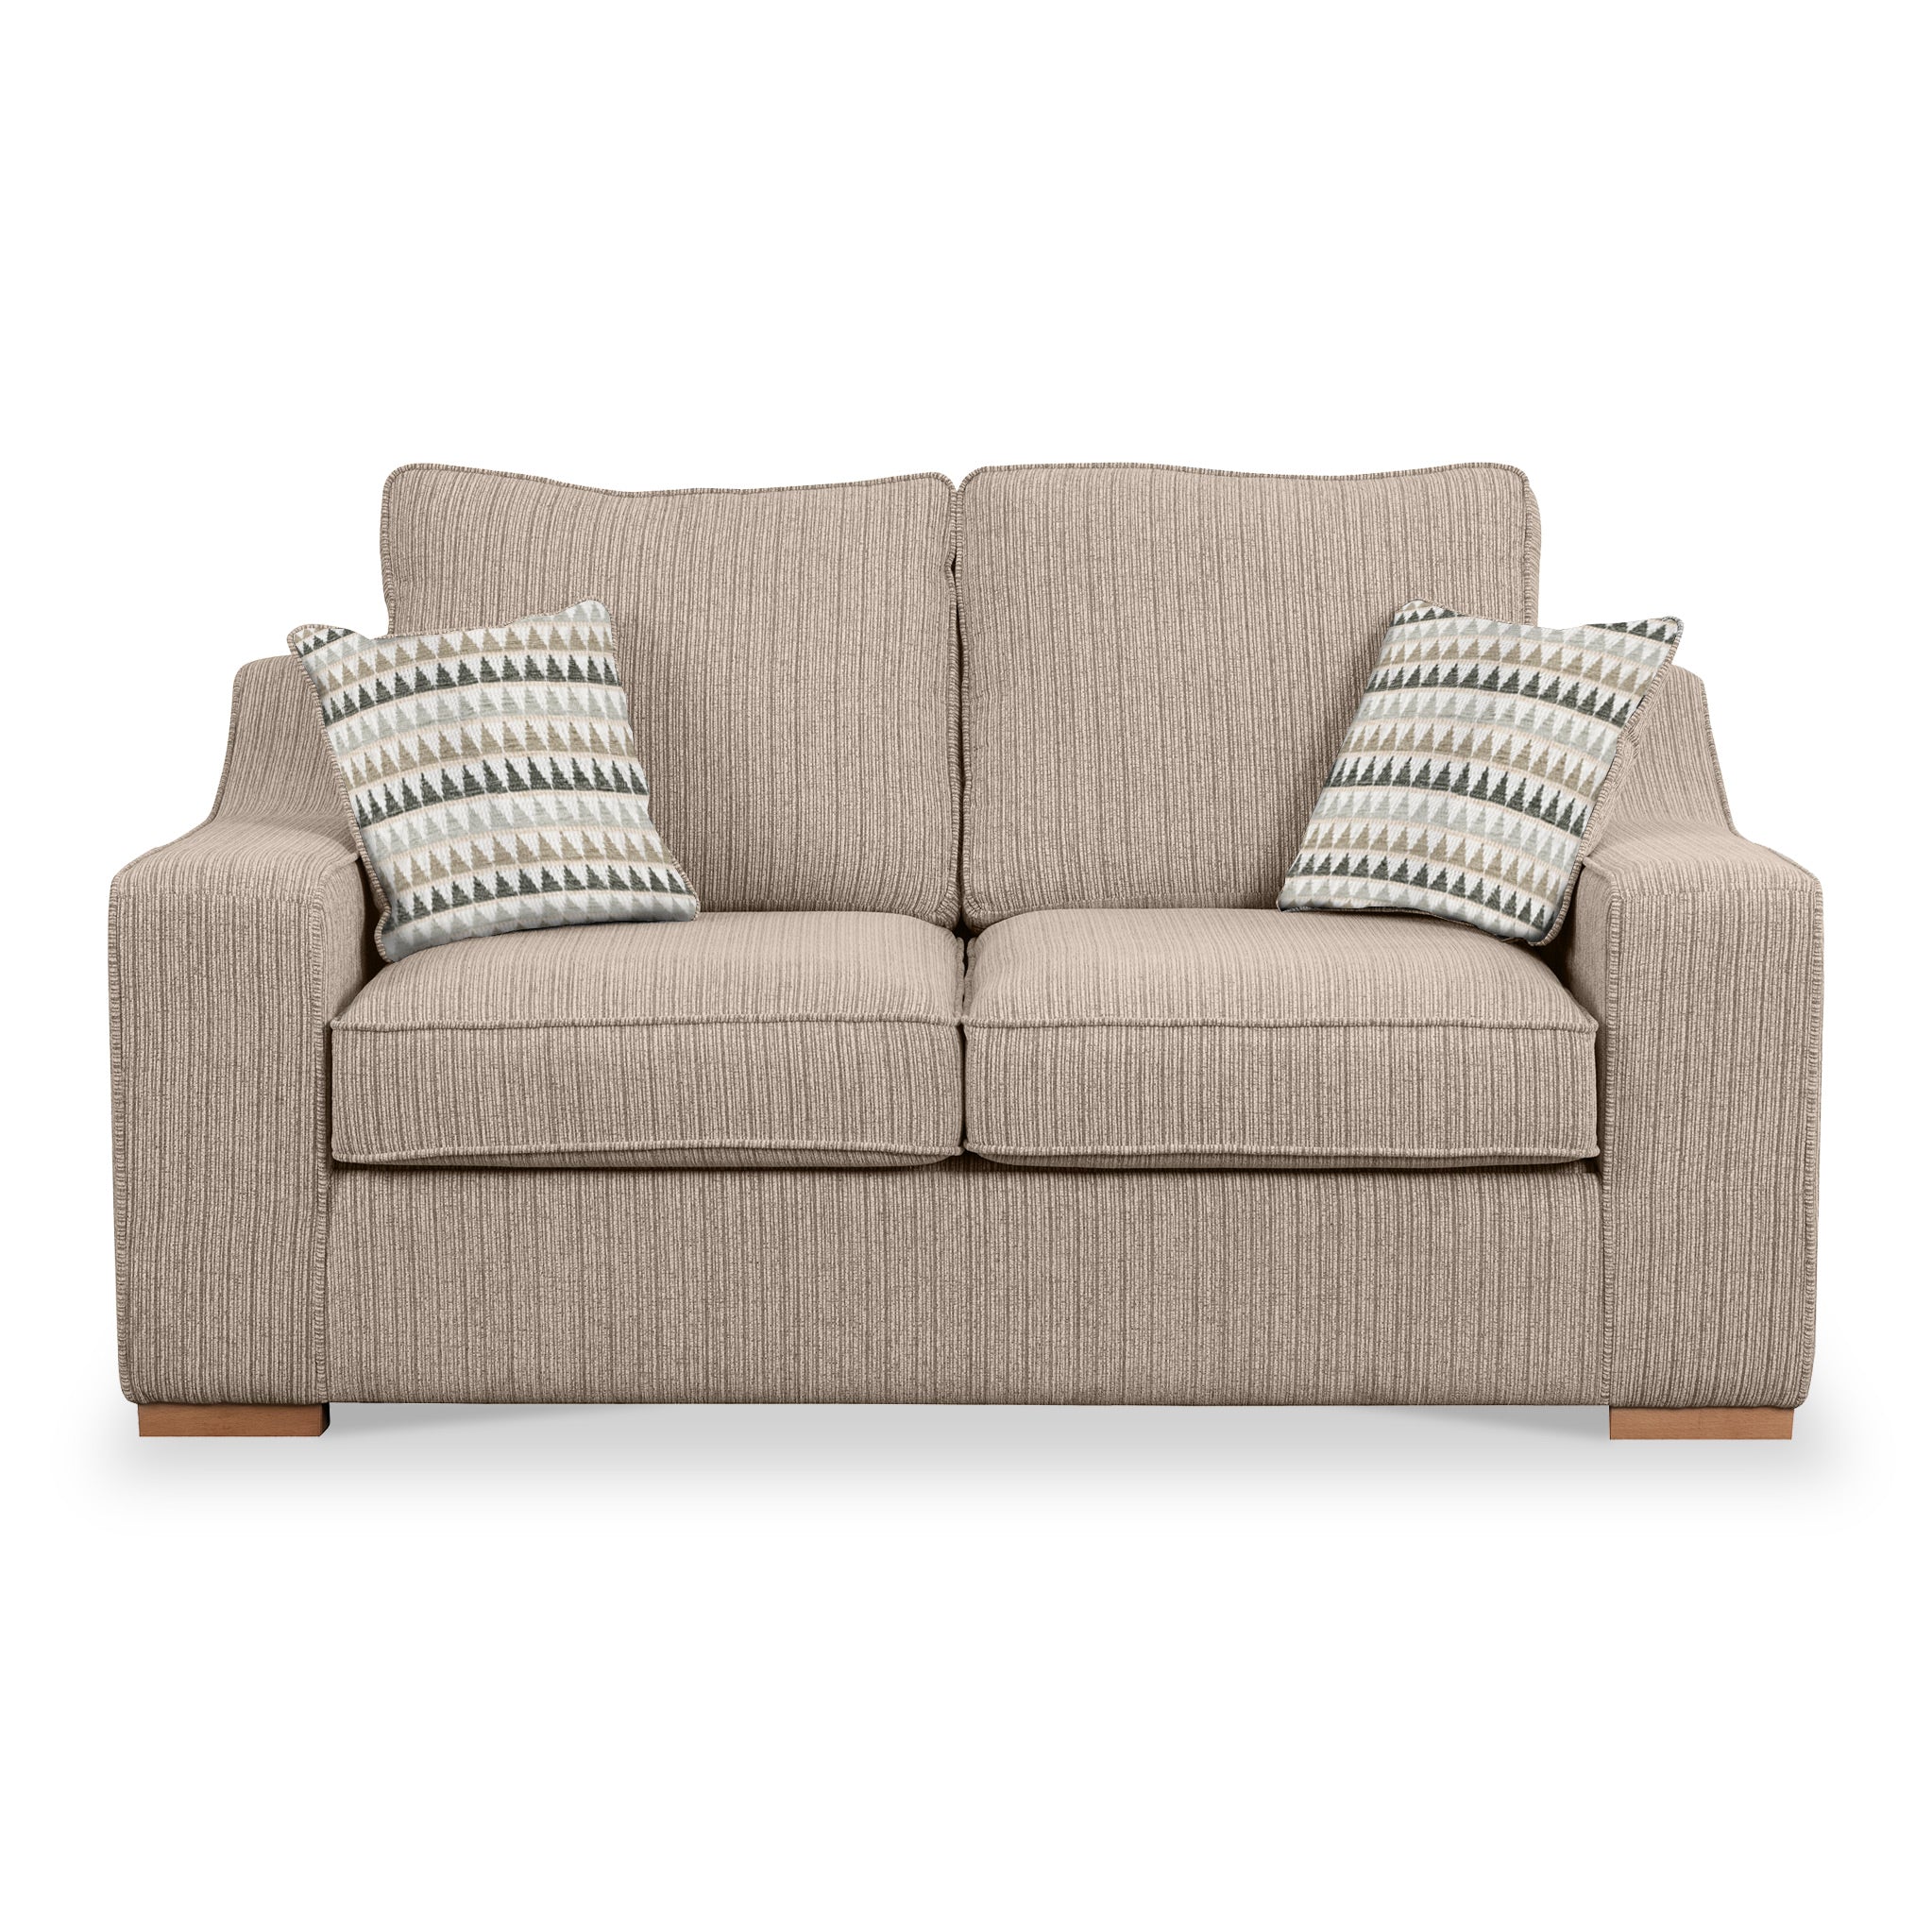 Ashow Fabric 2 Seater Sofabed Beige Charcoal Silver Roseland